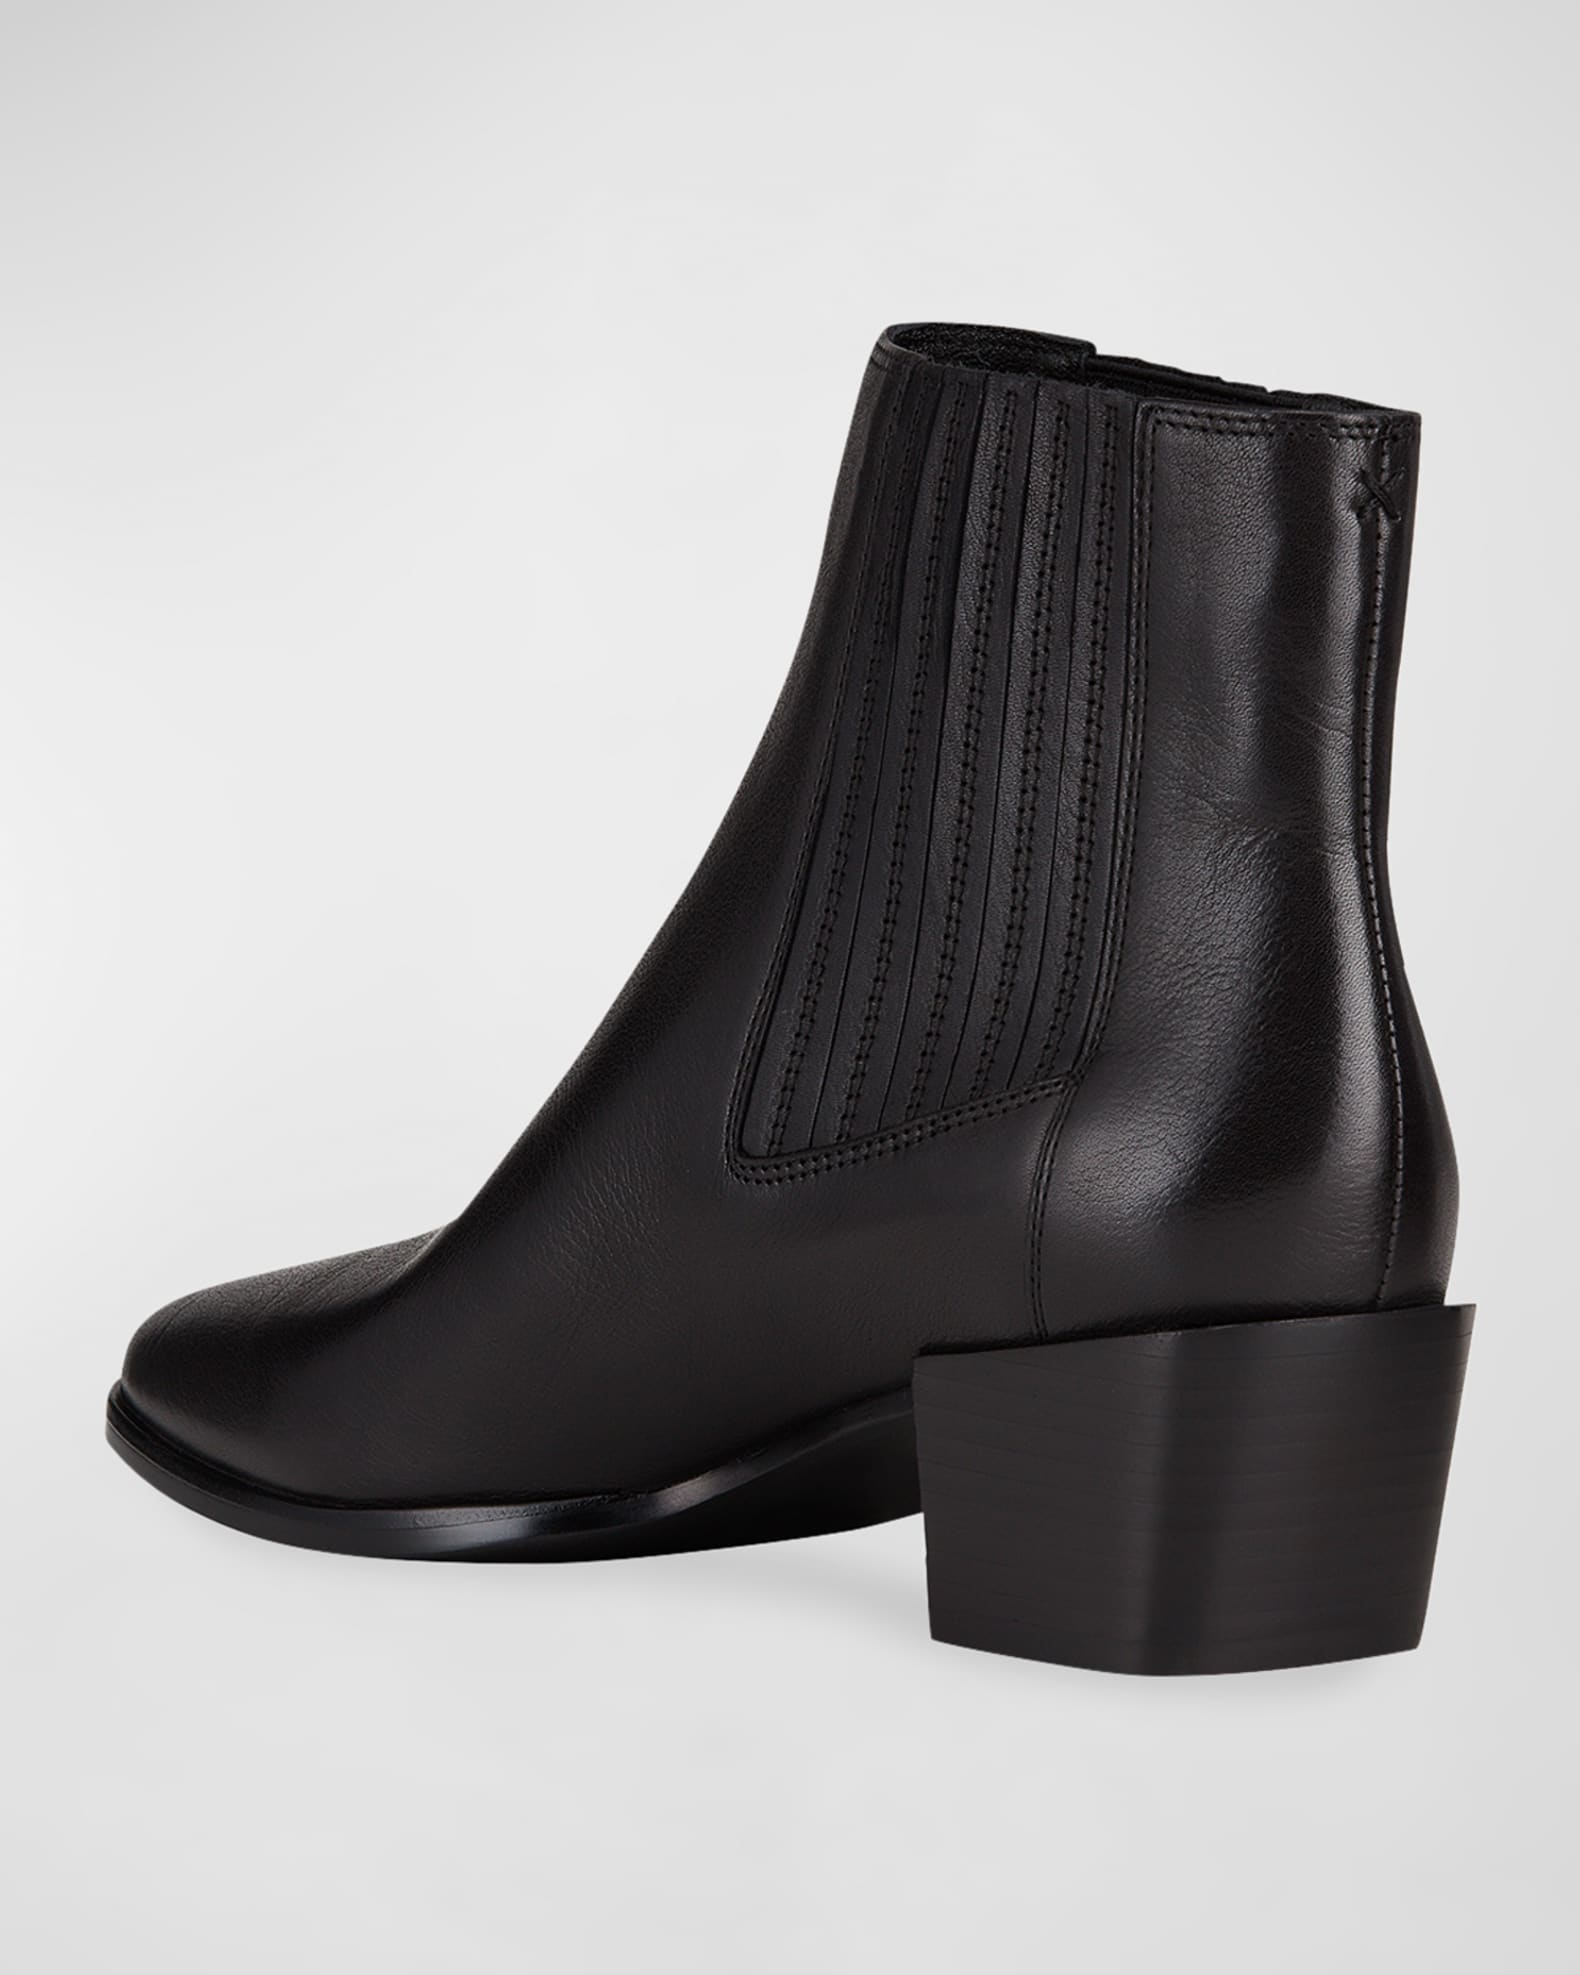 Rag & Bone Rover Leather Ankle Booties | Neiman Marcus